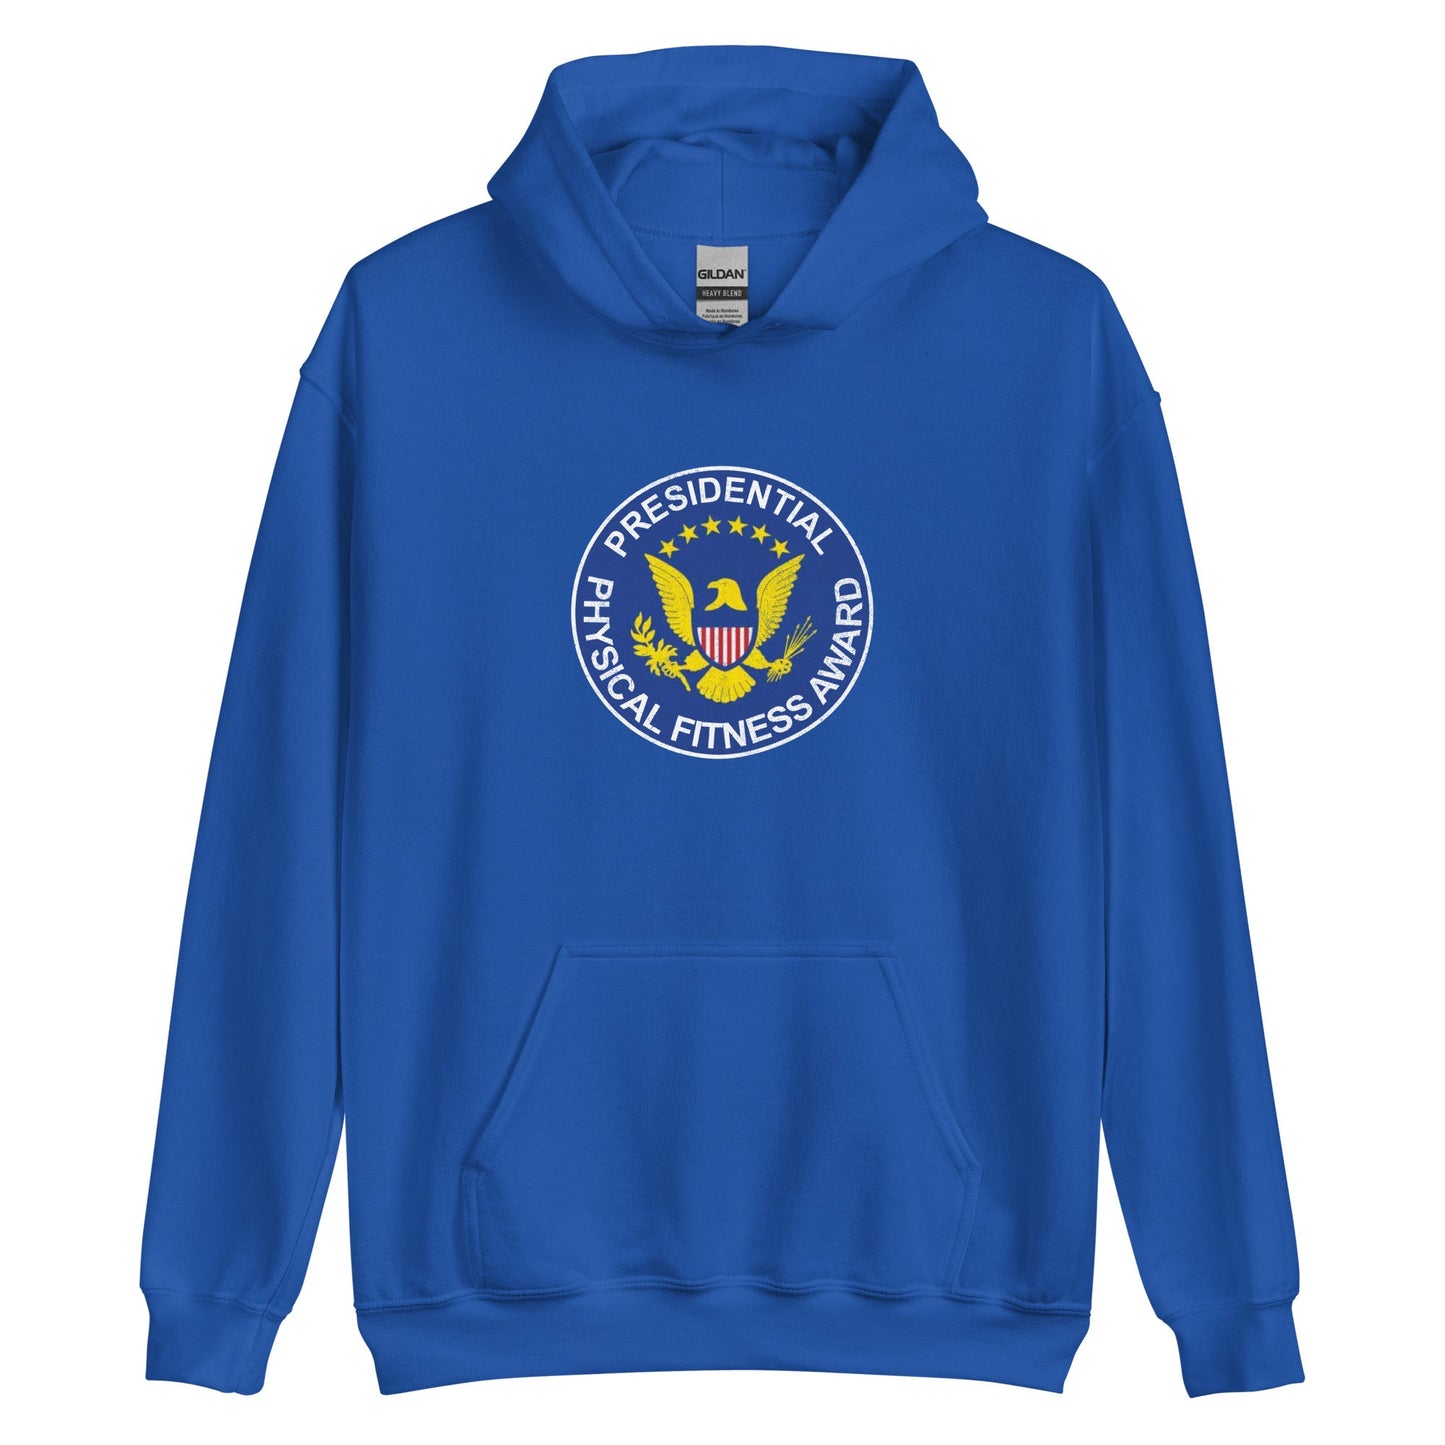 Presidential Physical Fitness Award Patch Retro Hoodie